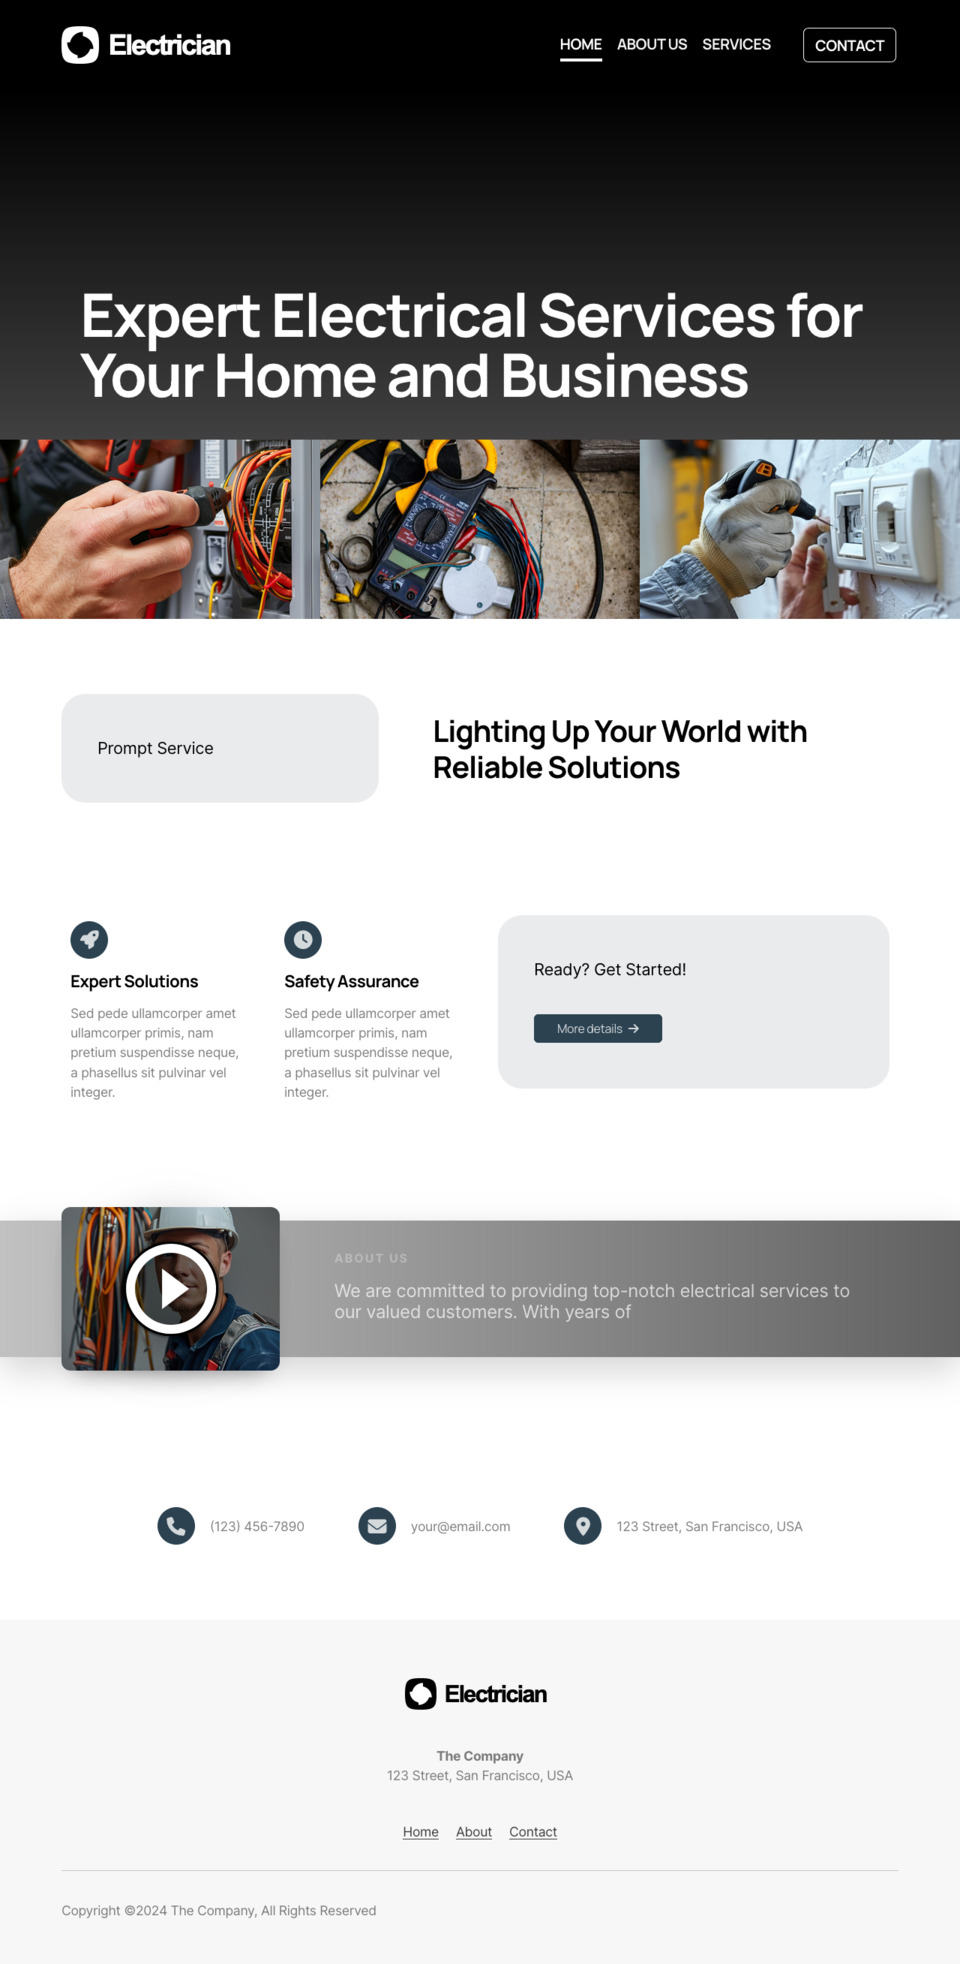 Electrician Website Template - Ideal for small businesses such as electricians, electrical services, technicians, handymen, and more